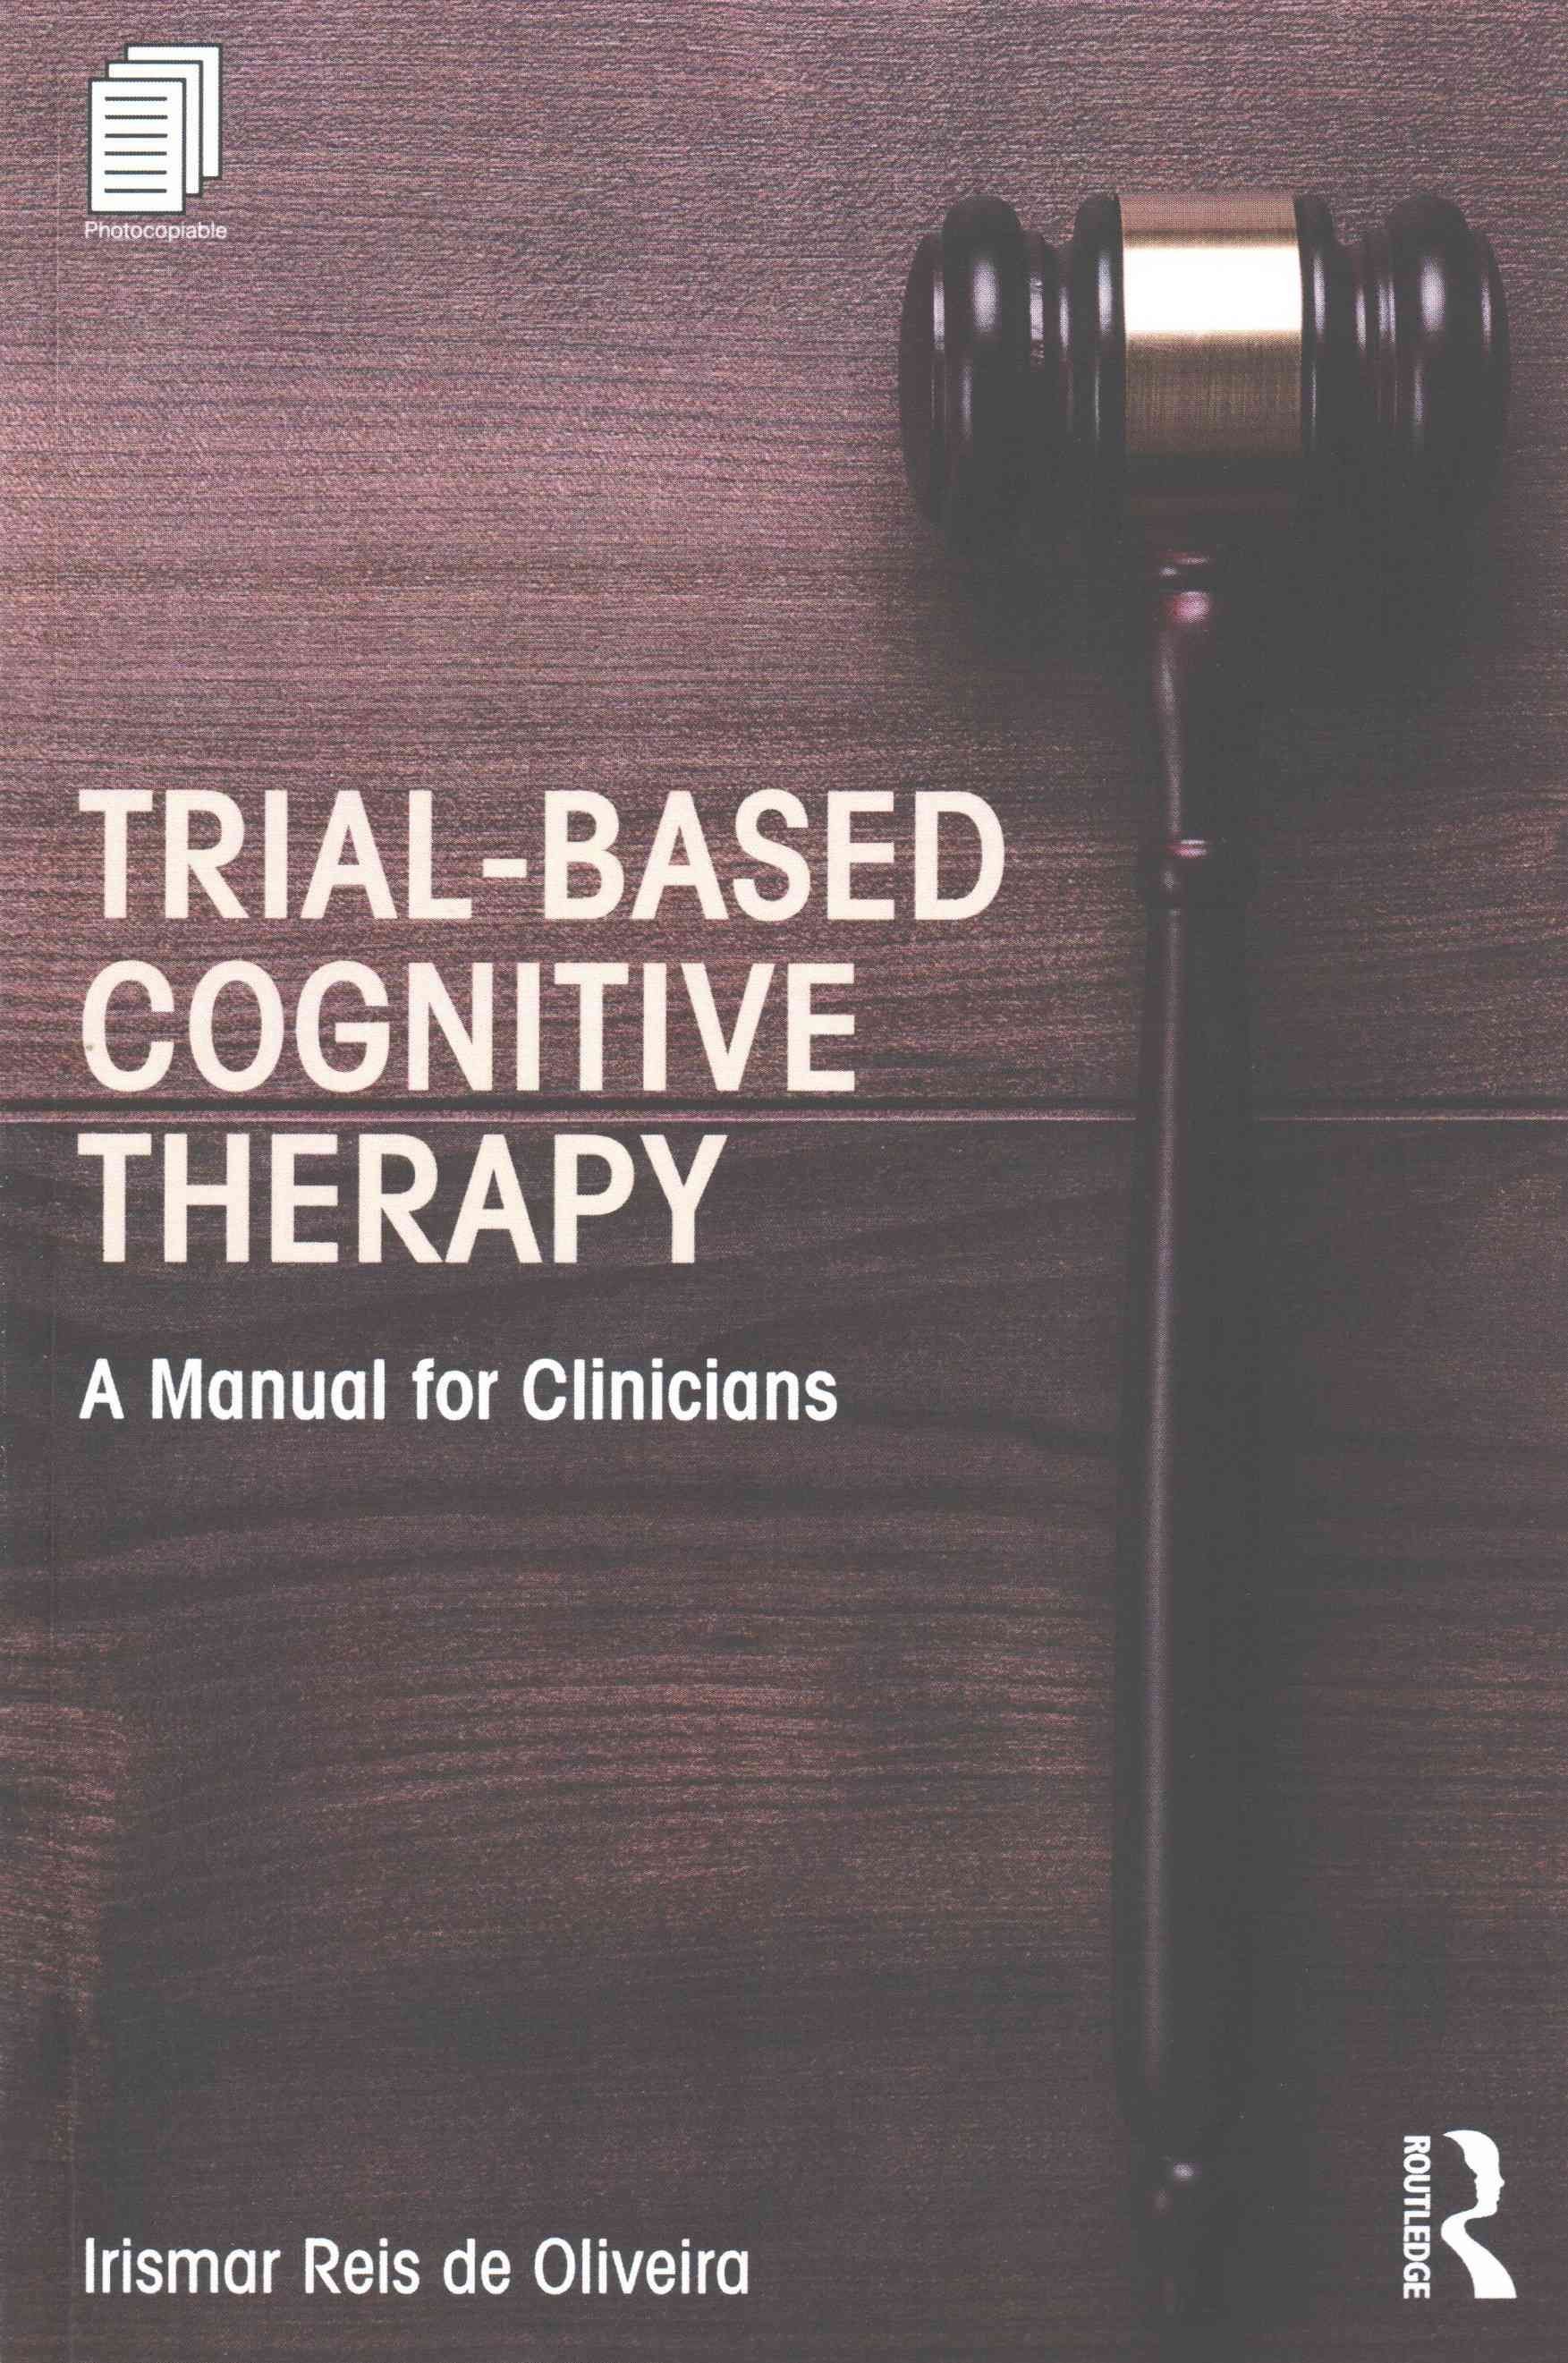 Trial-Based Cognitive Therapy